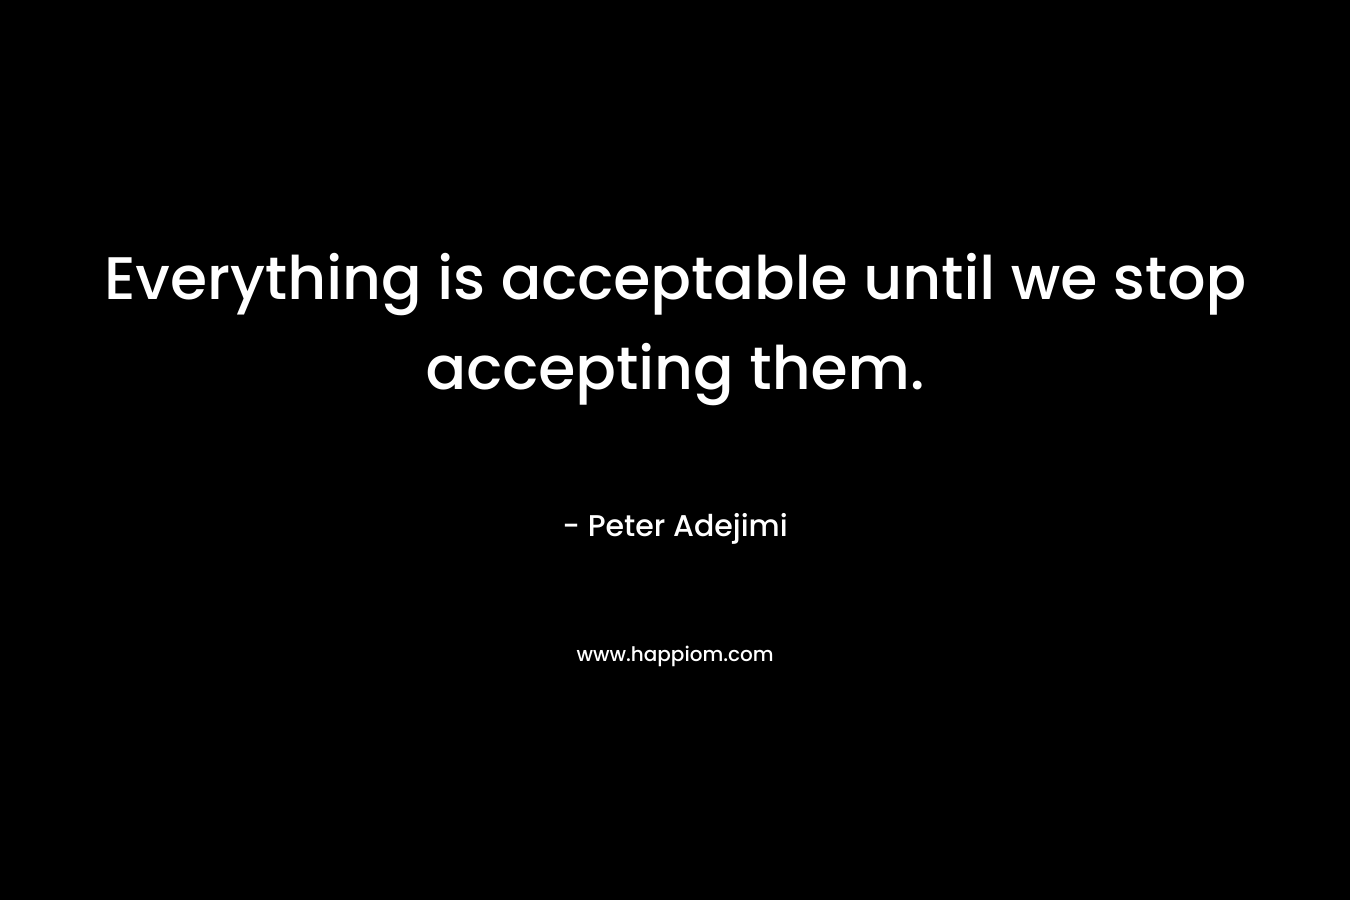 Everything is acceptable until we stop accepting them.